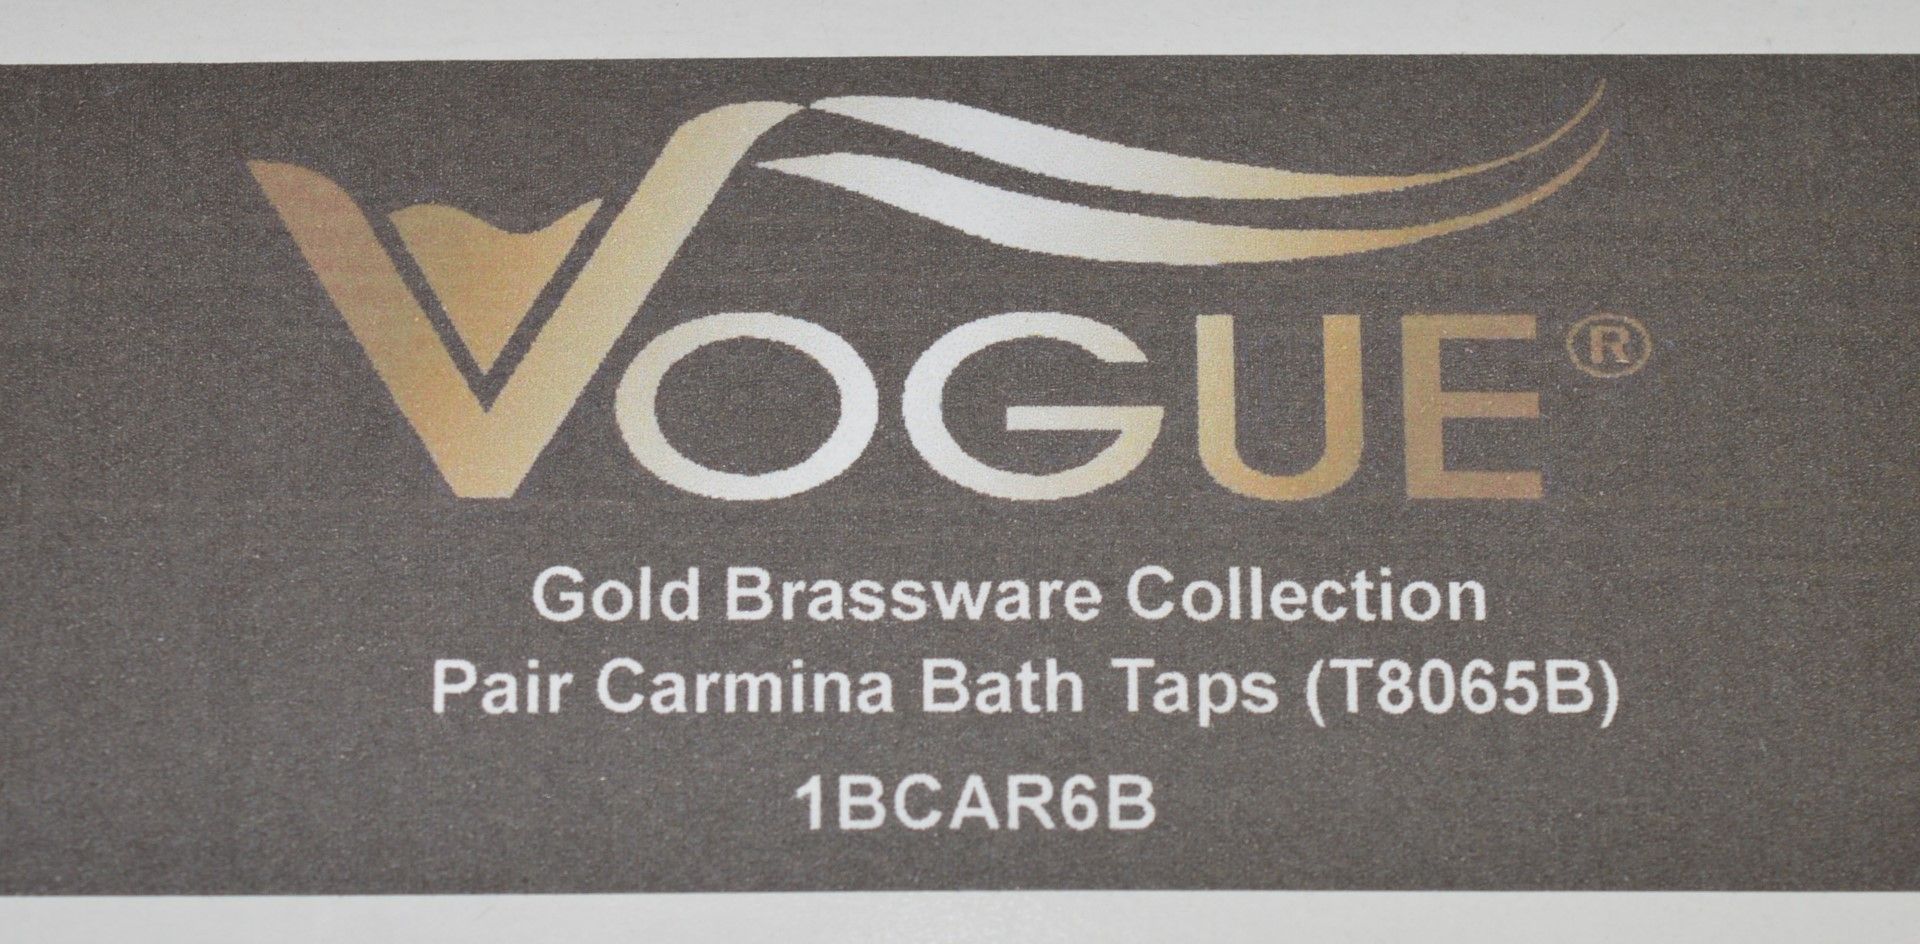 1 x Vogue Carmina Bath Taps - Pair Of - Vogue Bathrooms Gold Brassware Collection - High Quality - Image 6 of 6